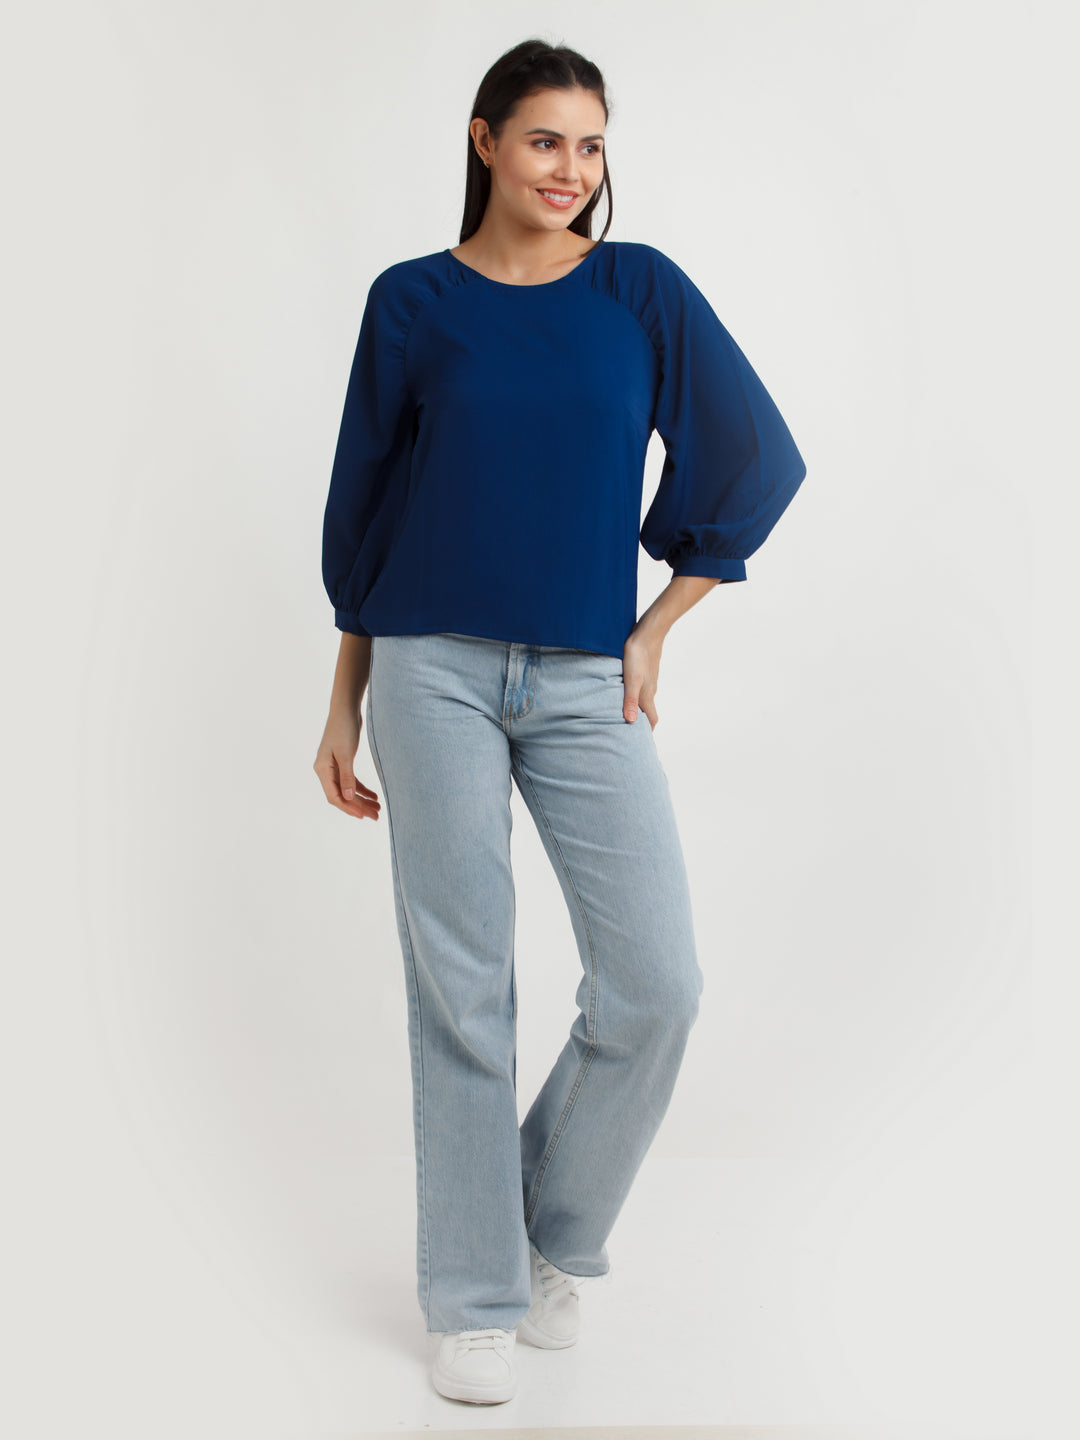 Navy Blue Solid Top For Women